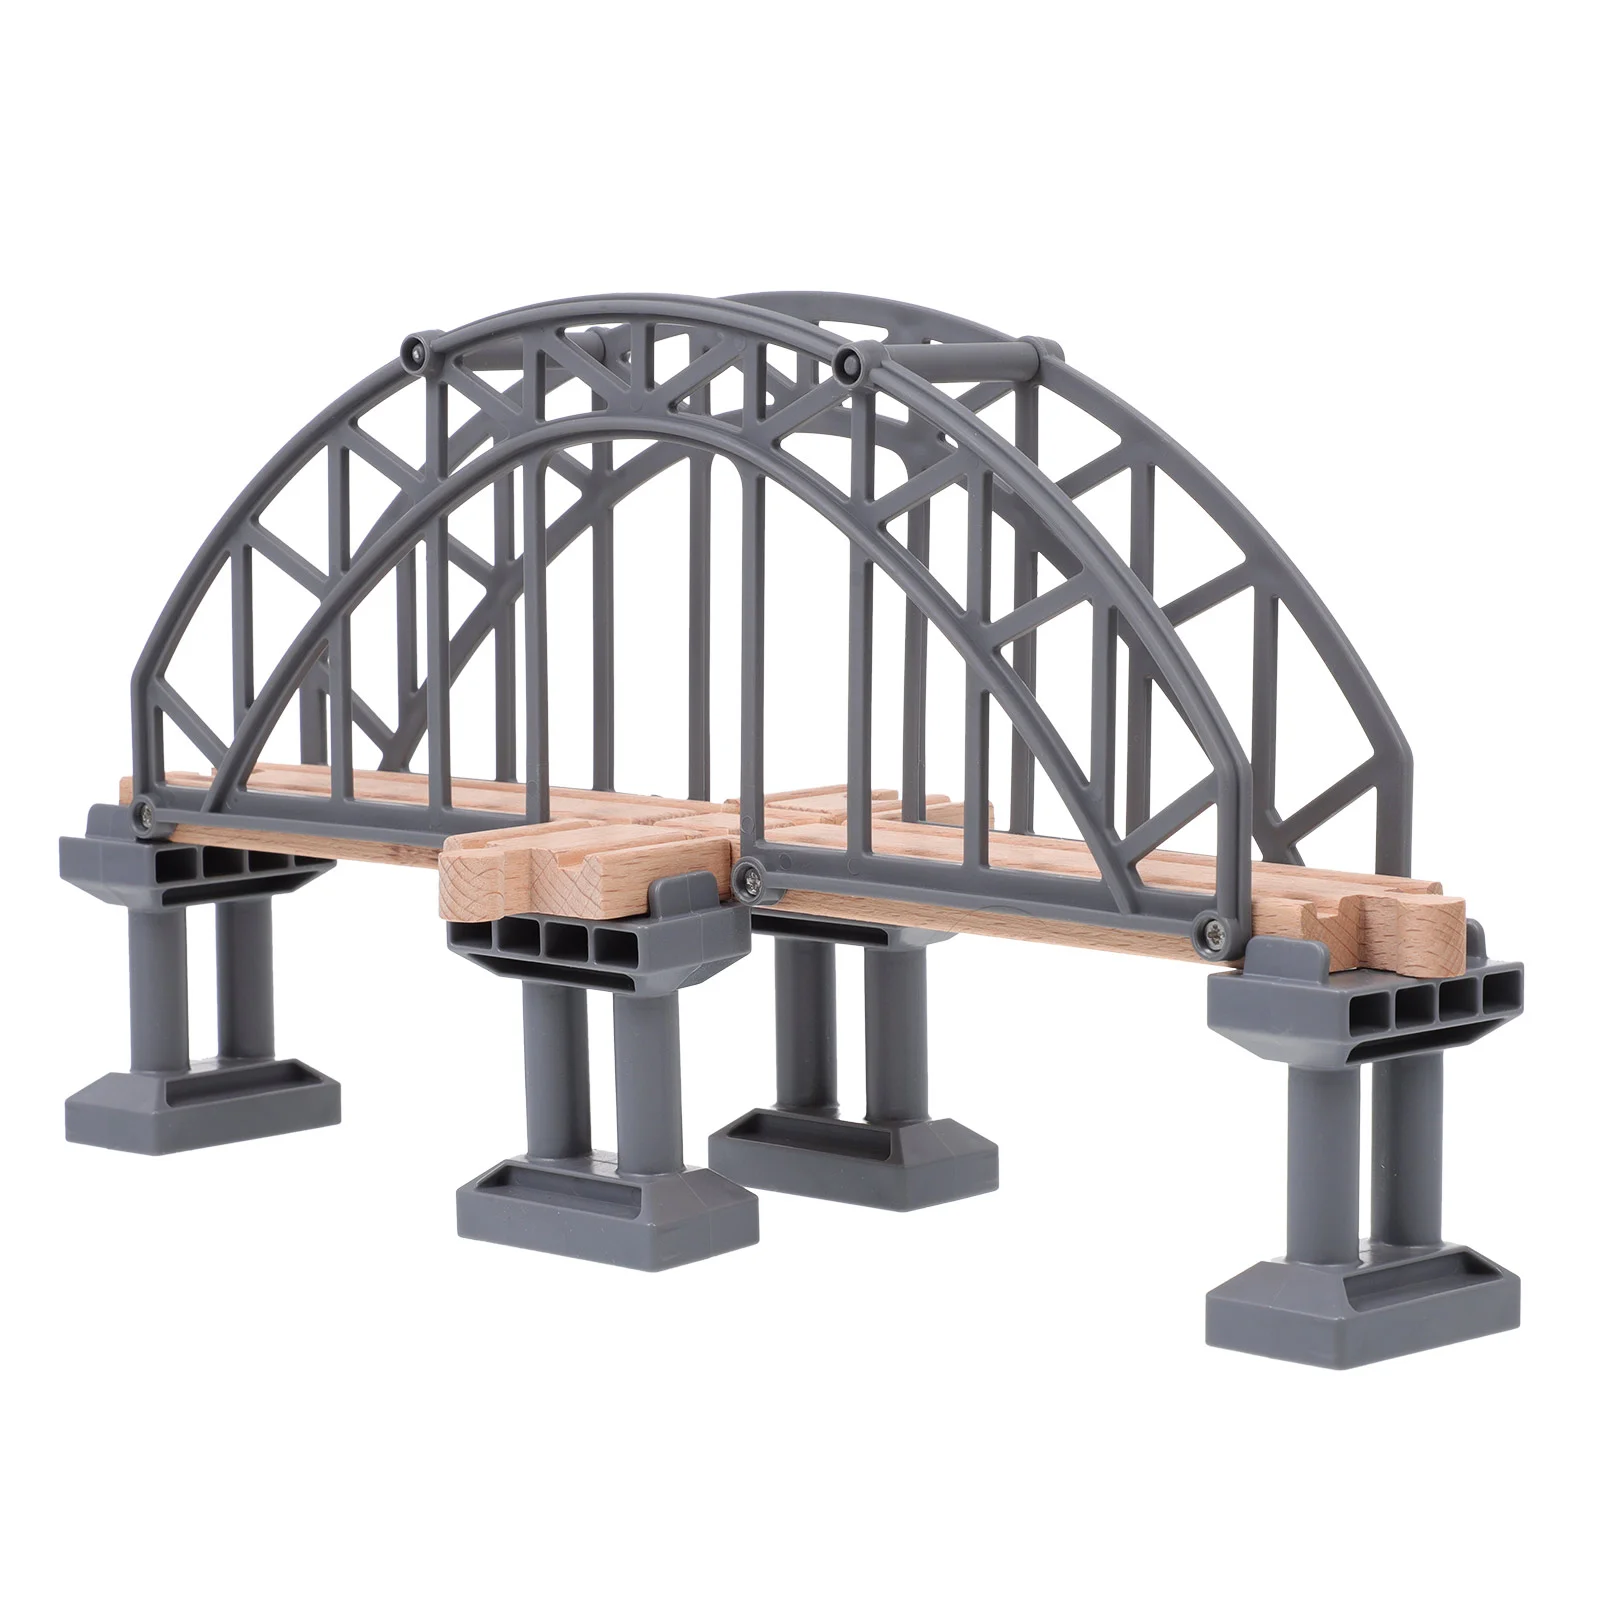 

Train Bridge Toy Wooden Railway Track Suspension Wood Children Expansion Crossing Accessories Tracks Set Accessory Layout Prop